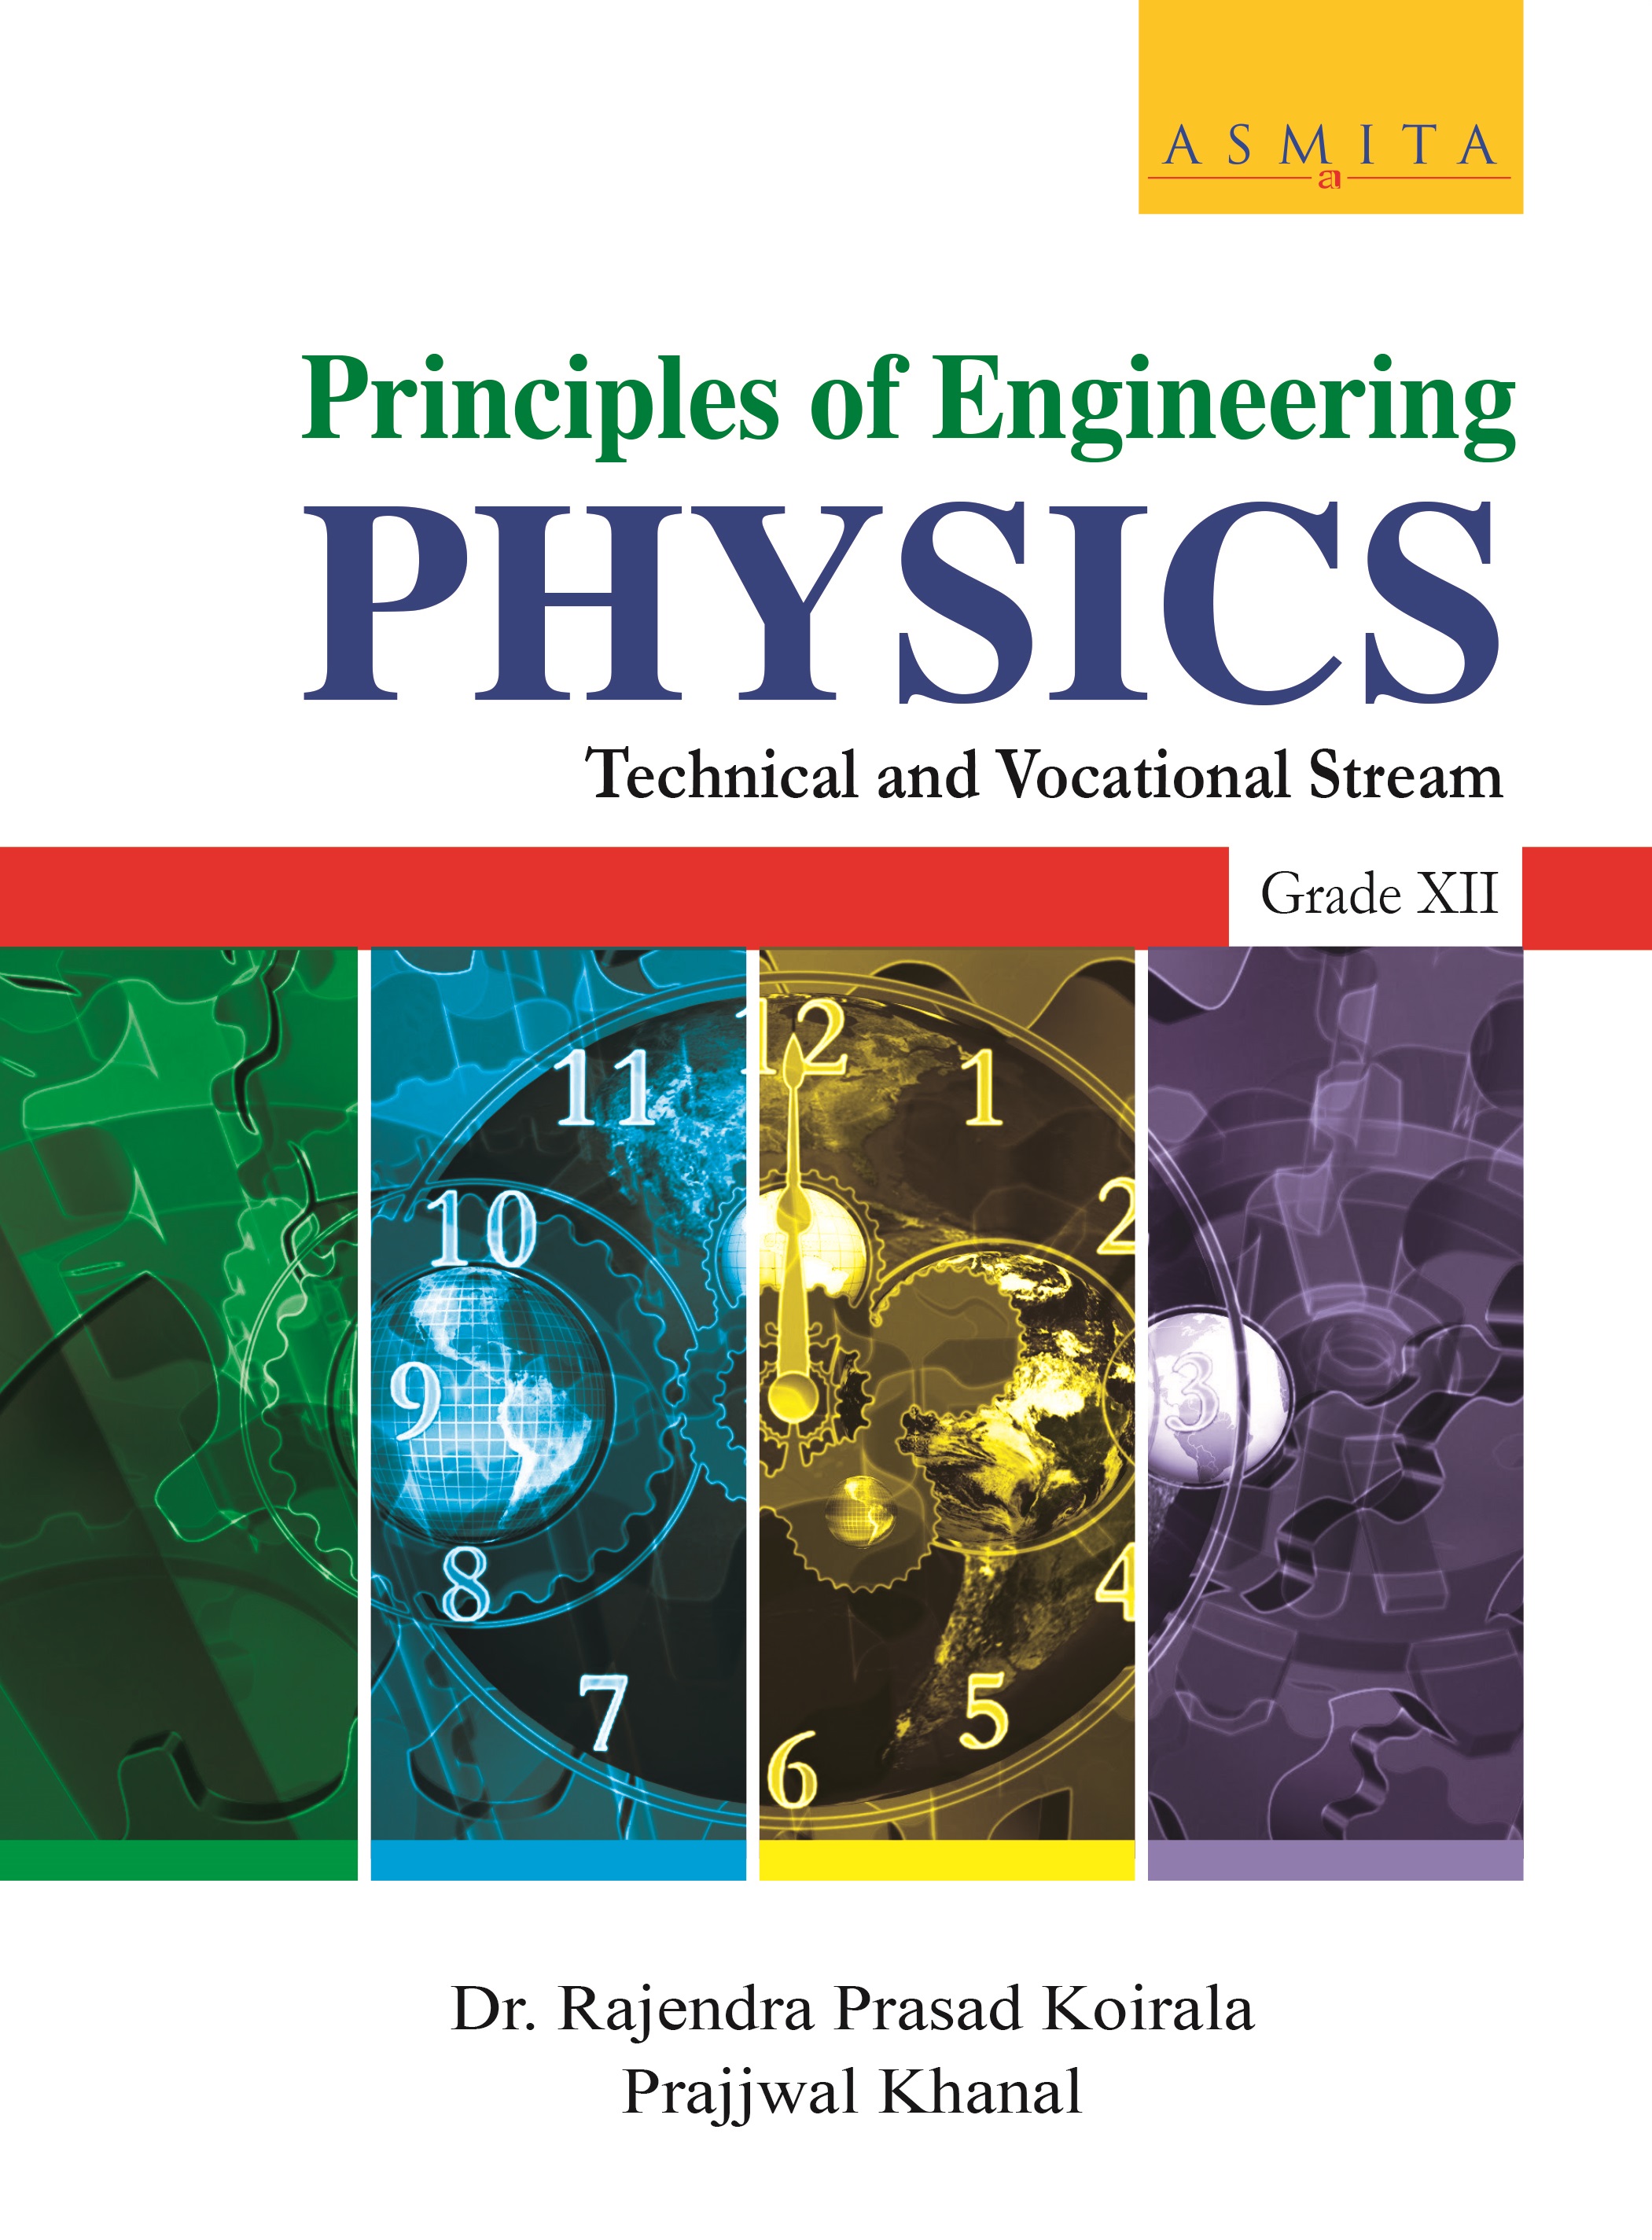 Principles of Engineering Physics -TVS -XII